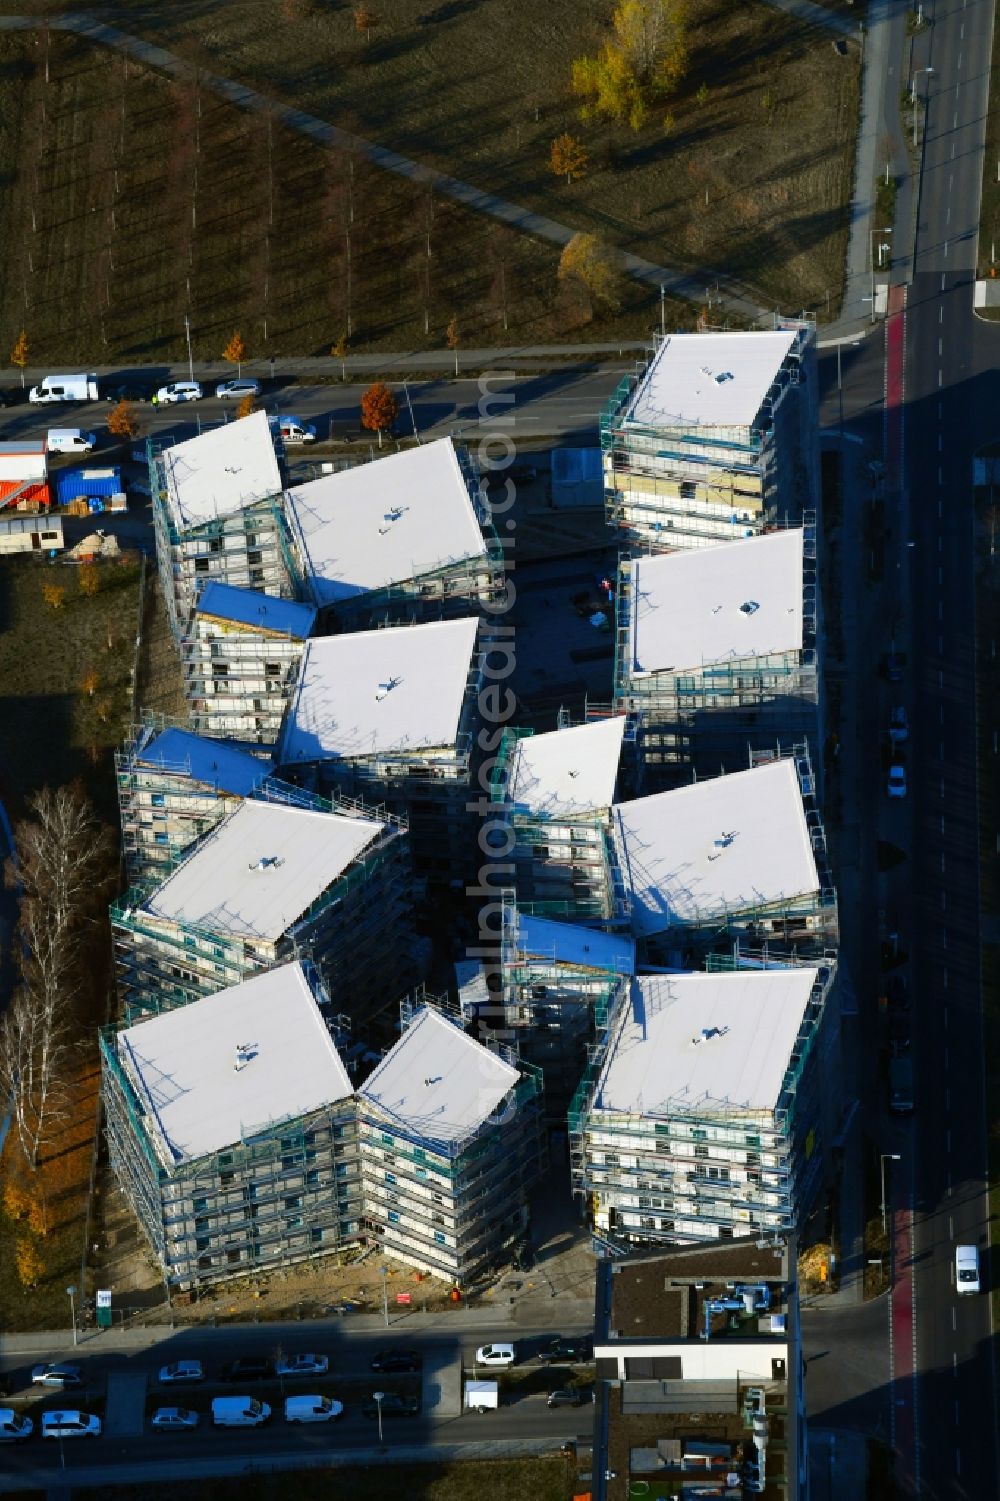 Berlin from the bird's eye view: Construction site to build a new multi-family residential complex a??Future Living Homesa?? between Gross-Berliner Damm - Konrad-Zuse-Strasse and Hermann-Dorner-Allee in the district Adlershof - Johannestal in Berlin, Germany